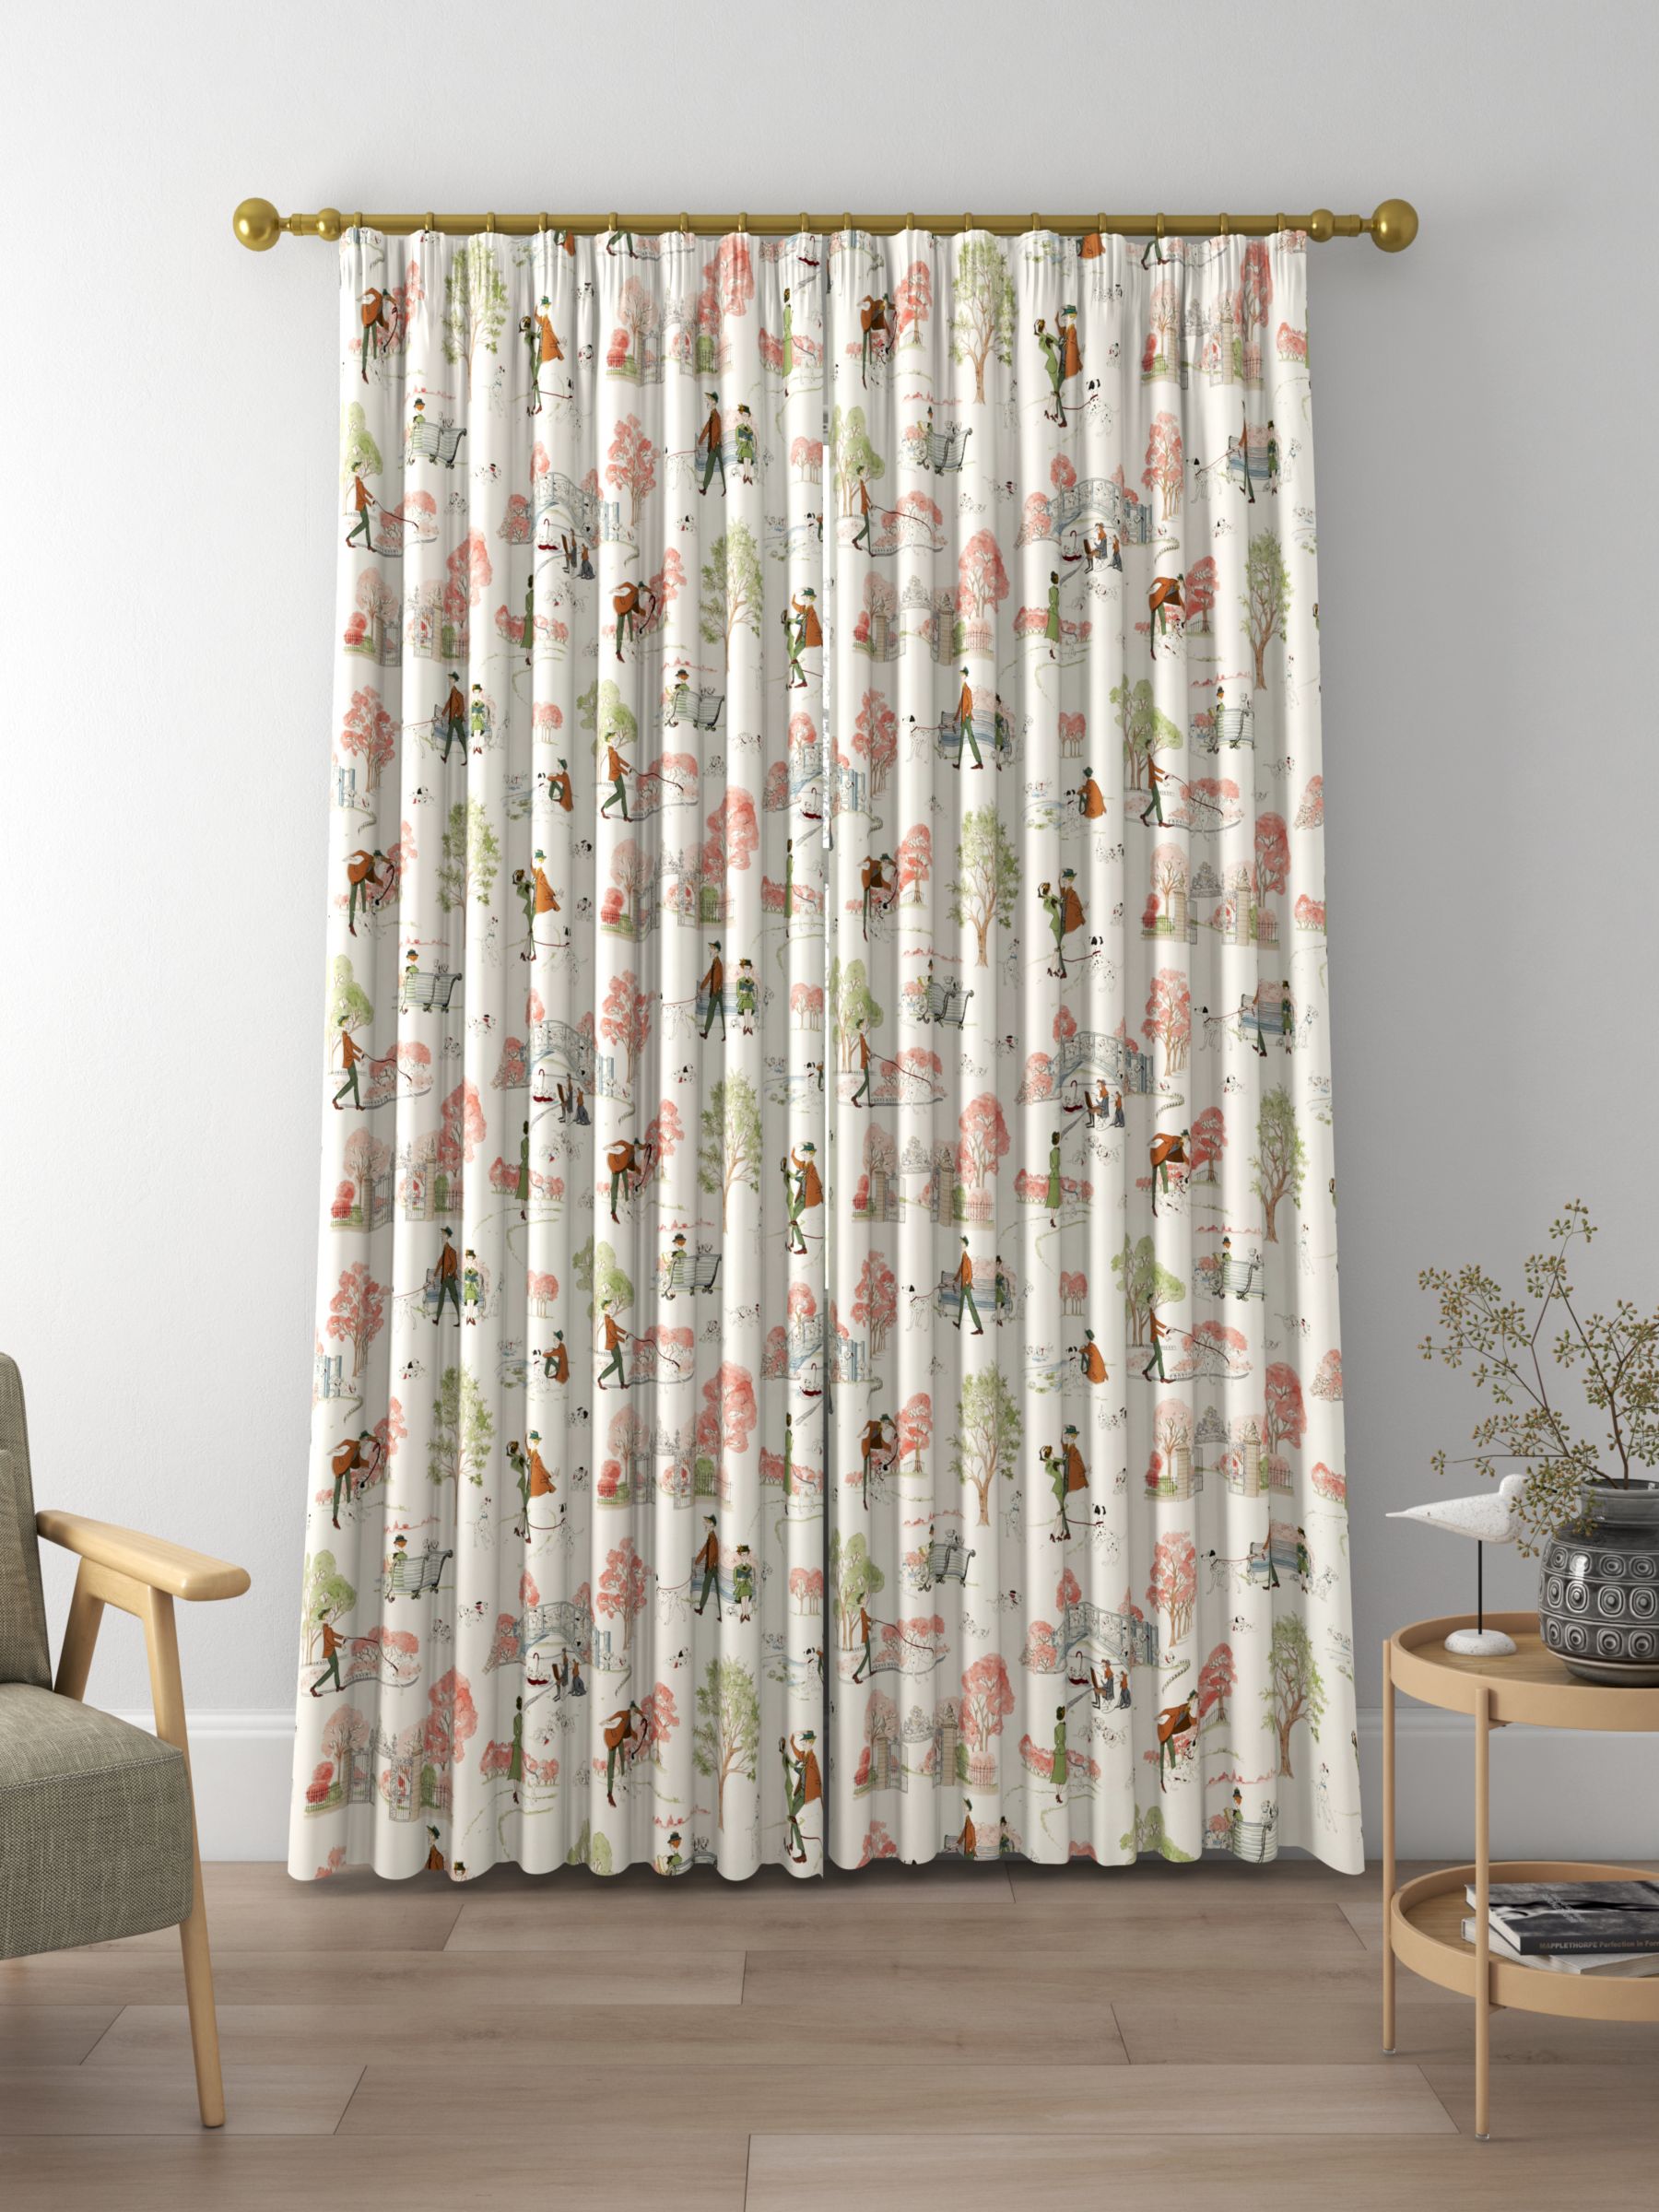 Sanderson 101 Dalmatians Made to Measure Curtains, Candy Floss